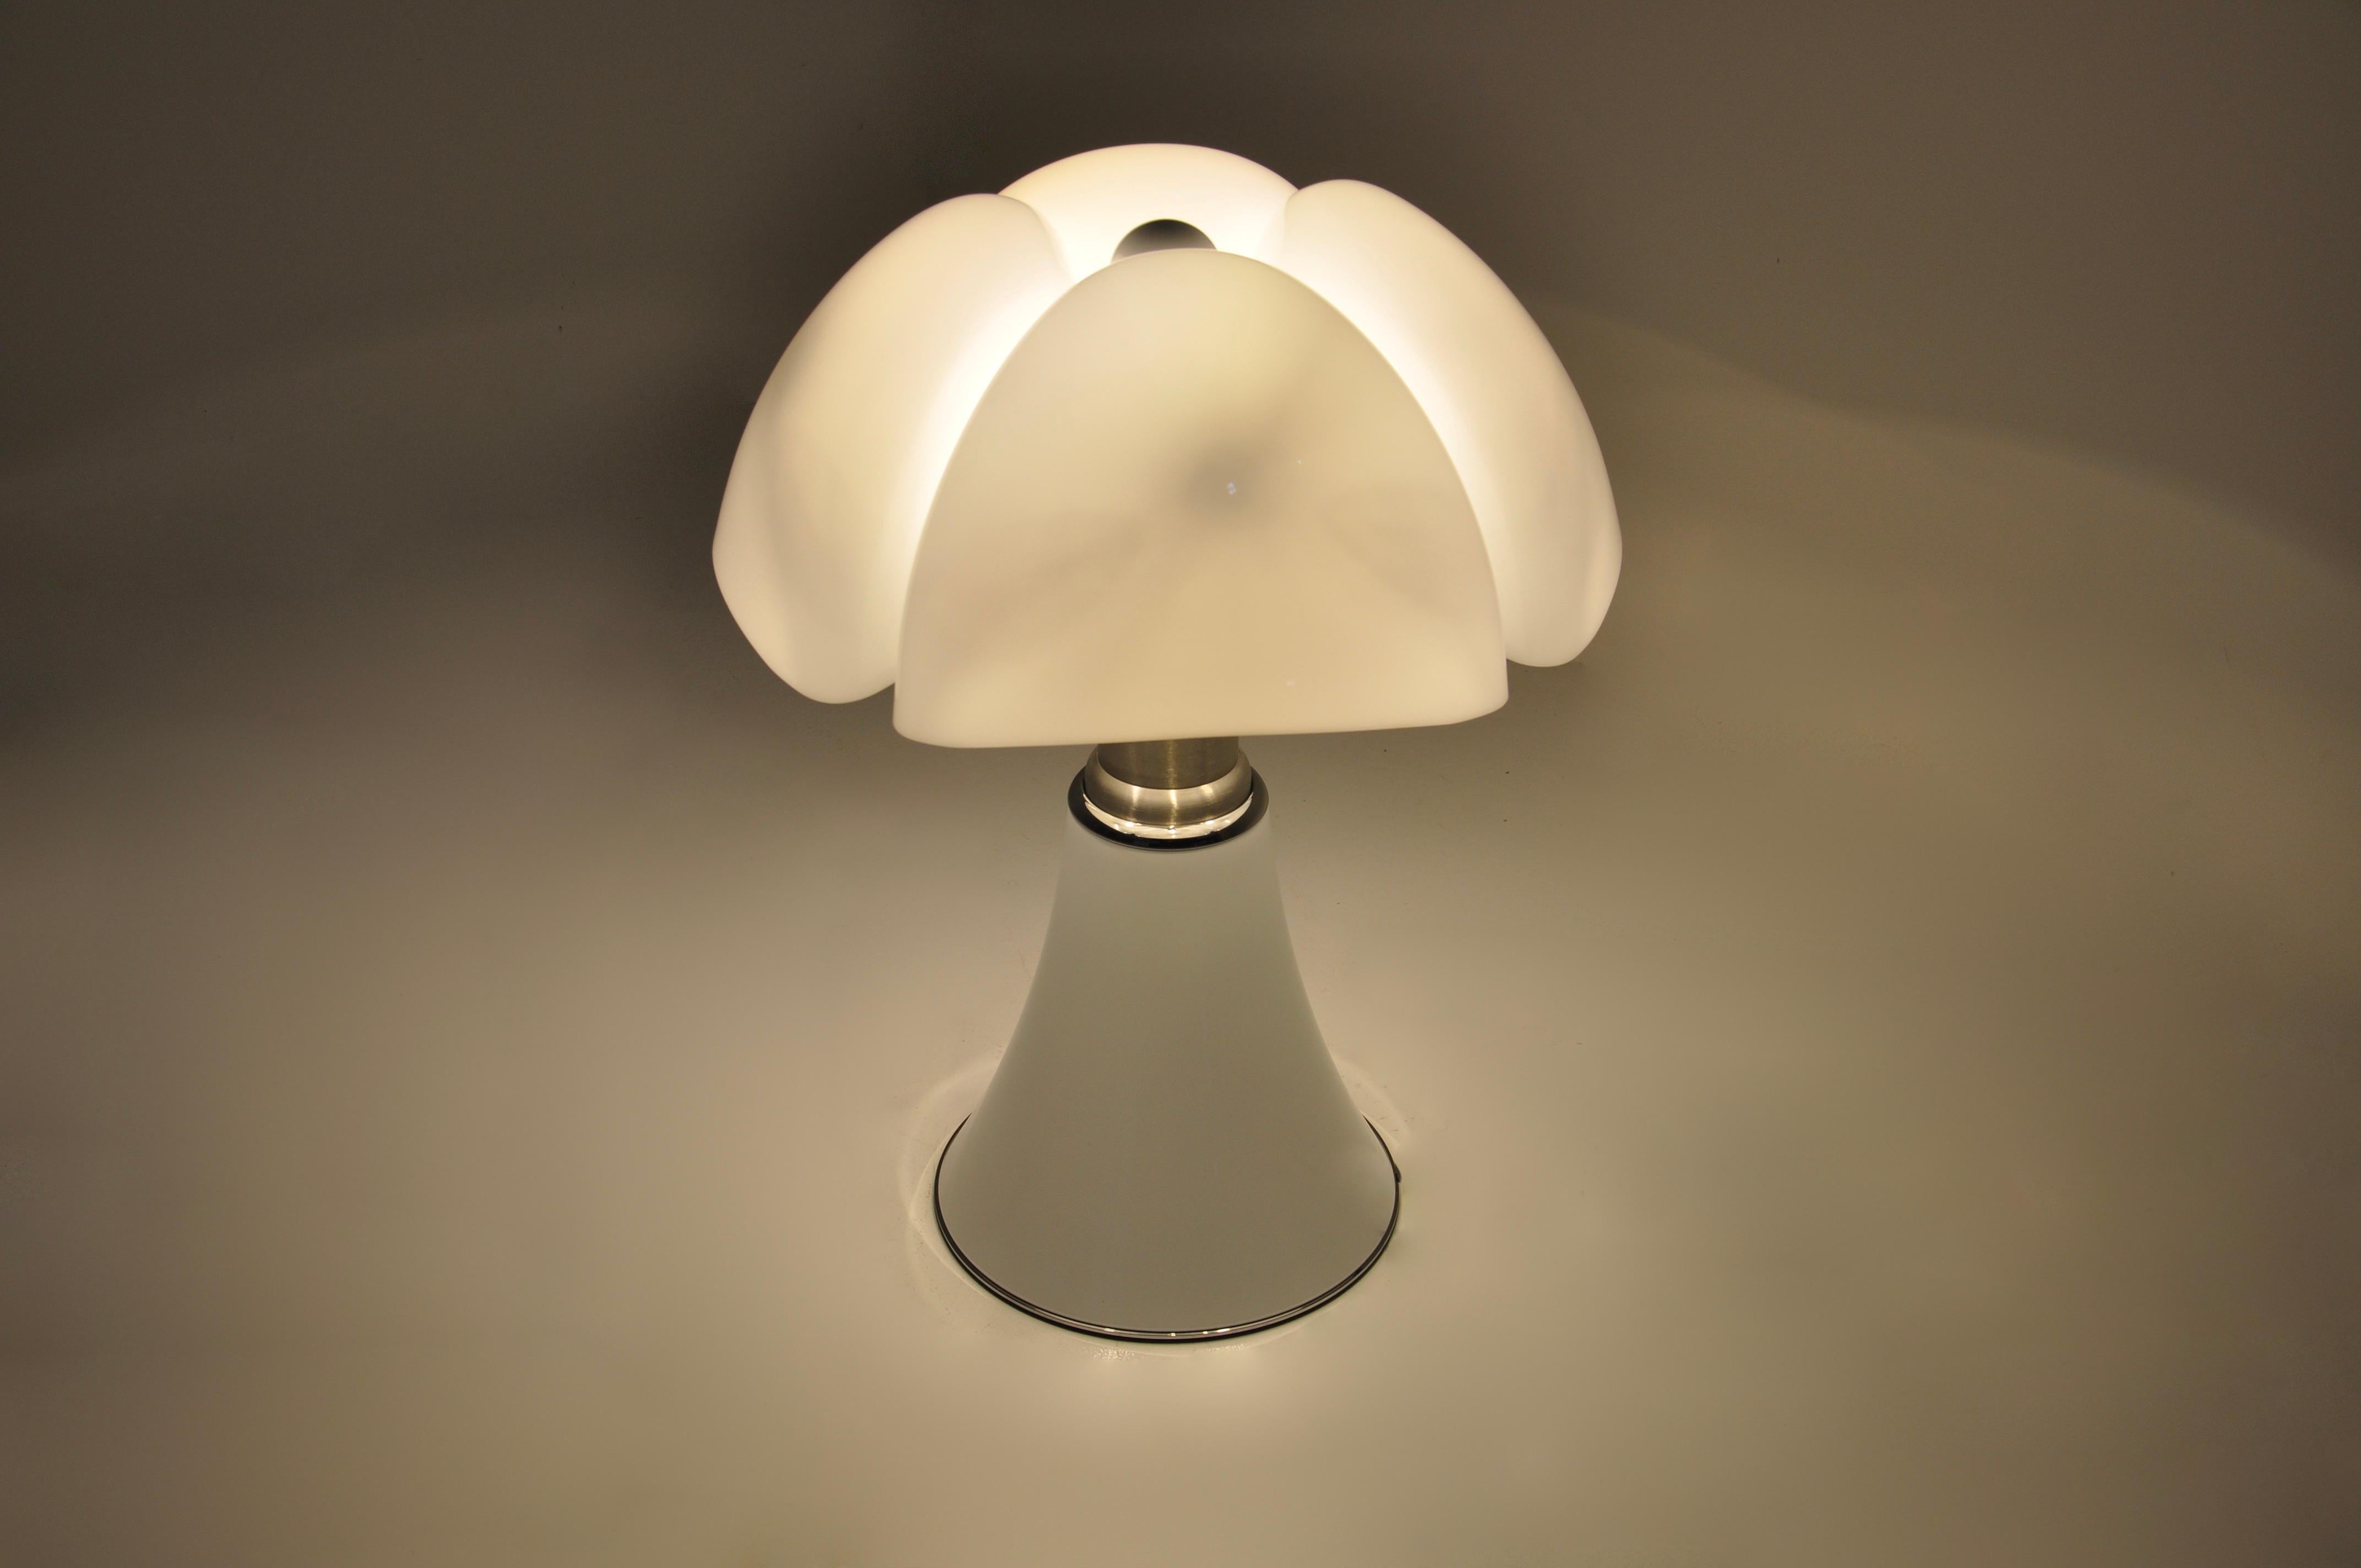 Mid-Century Modern White Pipistrello Table Lamp by Gae Aulenti for Martinelli Luce